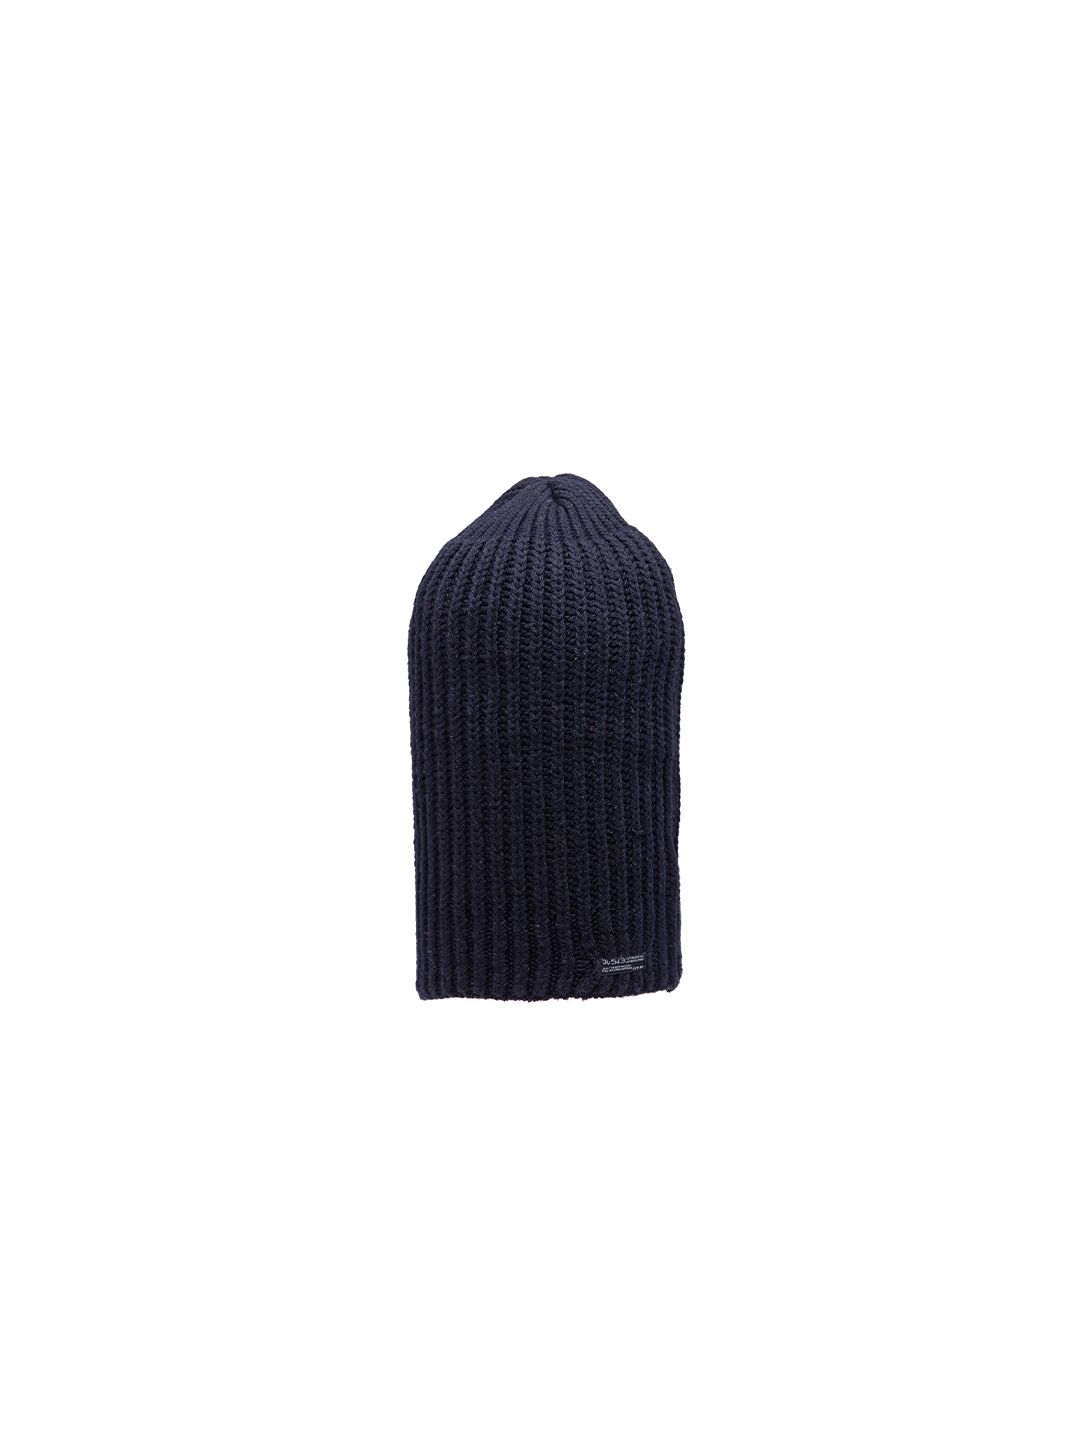 513 Women Navy Blue Self Design Knitted Beanie Price in India